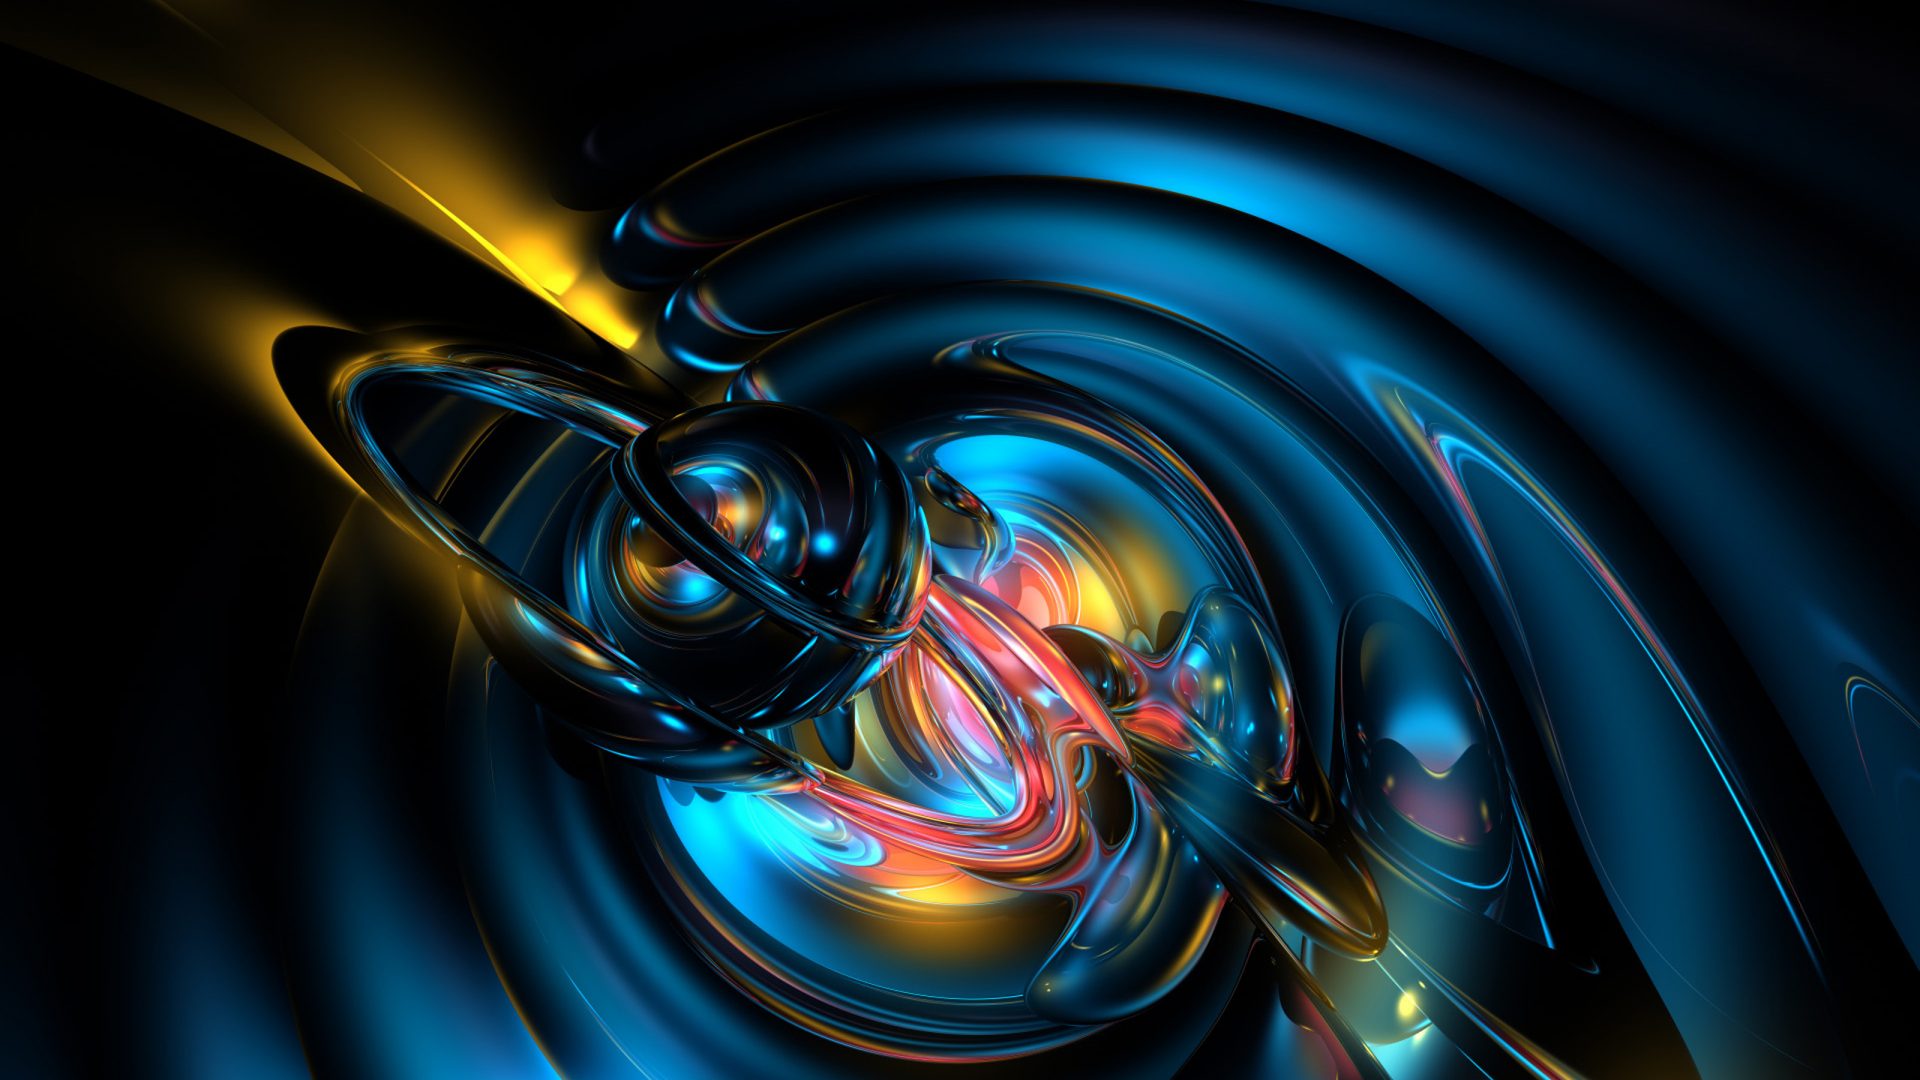 Abstract 3 D Blue Graphics Art Works HD Wallpaper For Desk For Your XFCE Desktop